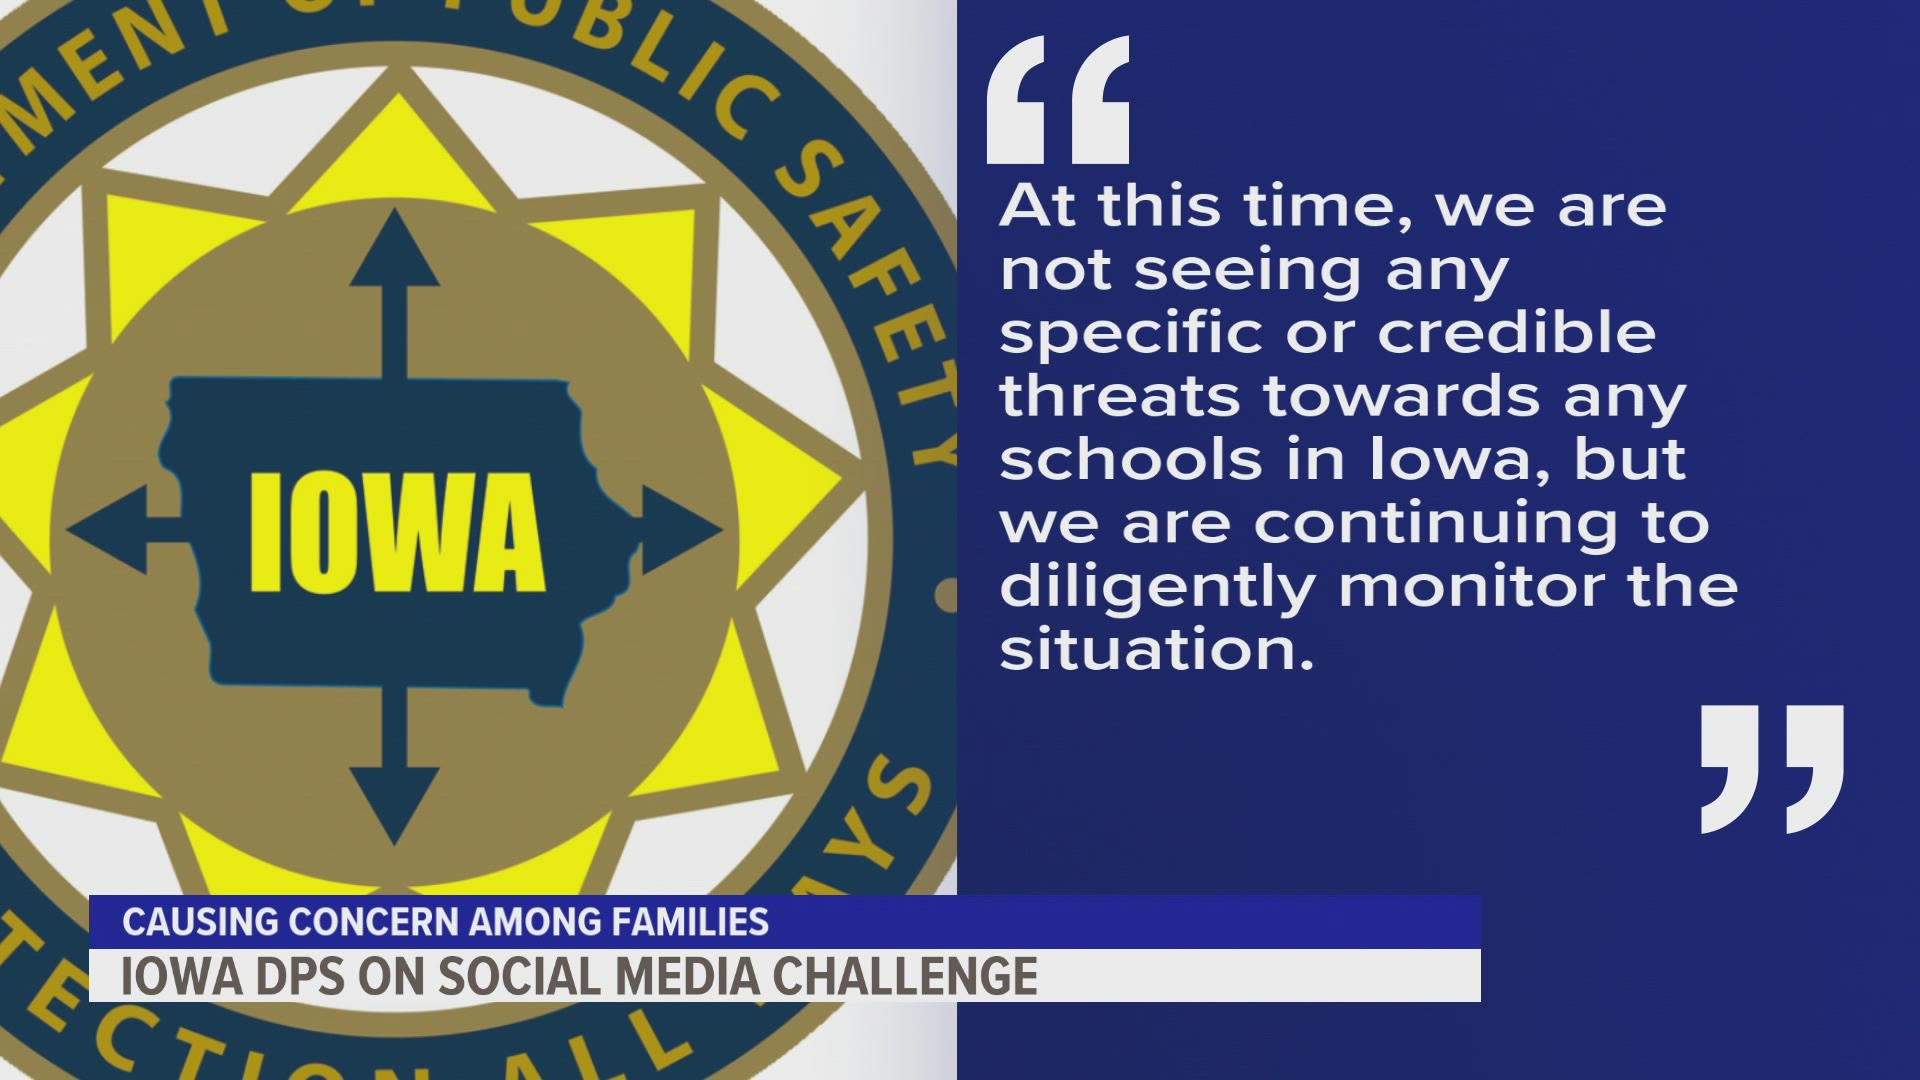 The Iowa Department of Public Safety says it is monitoring a nationwide threat of possible shootings or bombings for Friday.